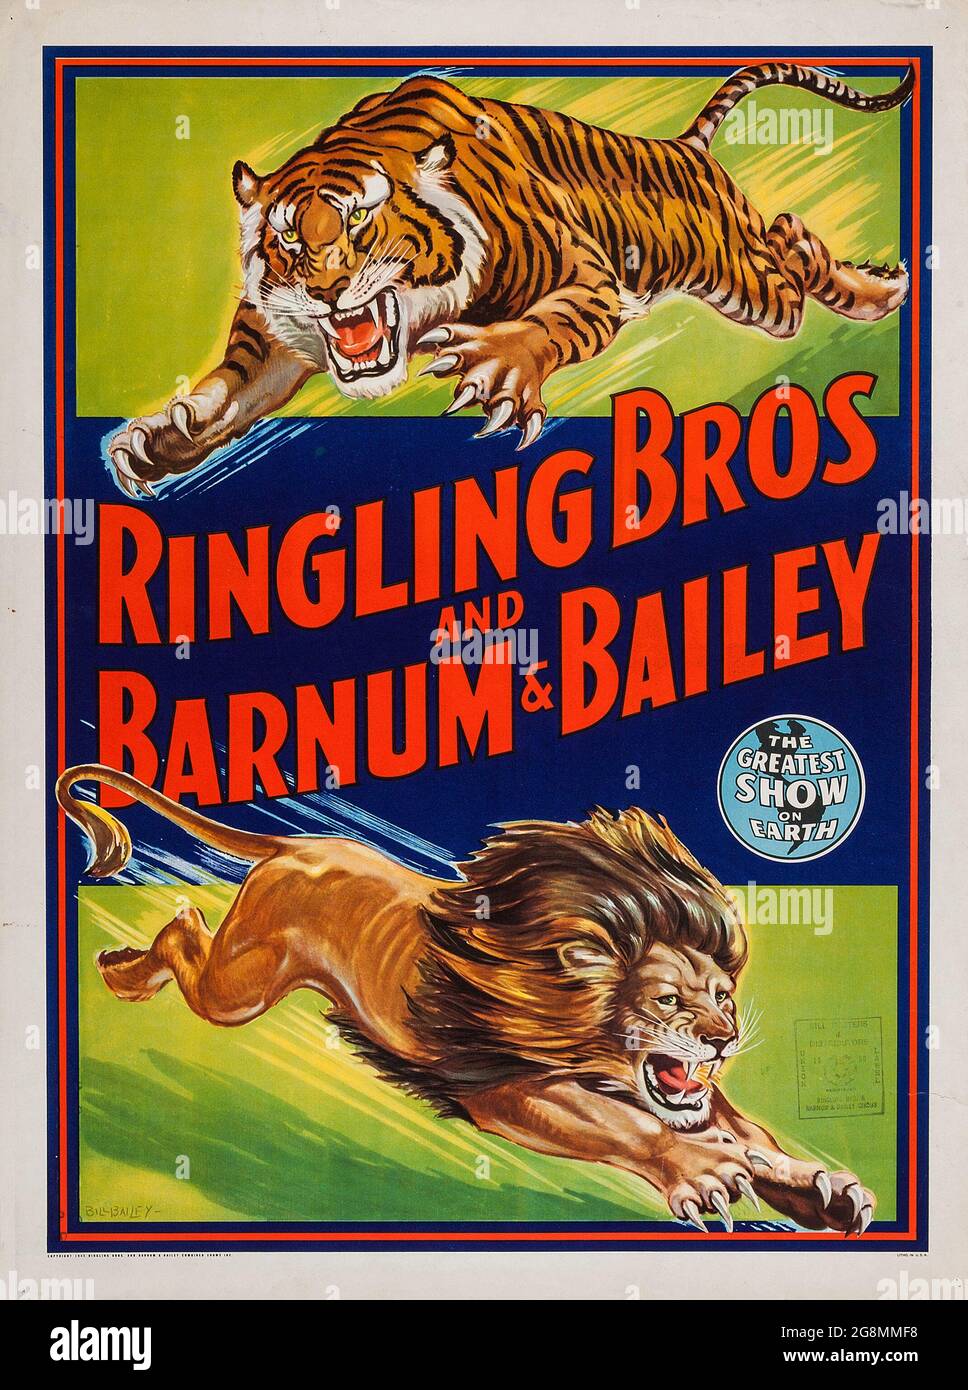 Ringling Bros and Barnum & Bailey Circus (1945). Vintage circus poster feat. an attacking tiger and lion. 'The Greatest Show on Earth'. Stock Photo